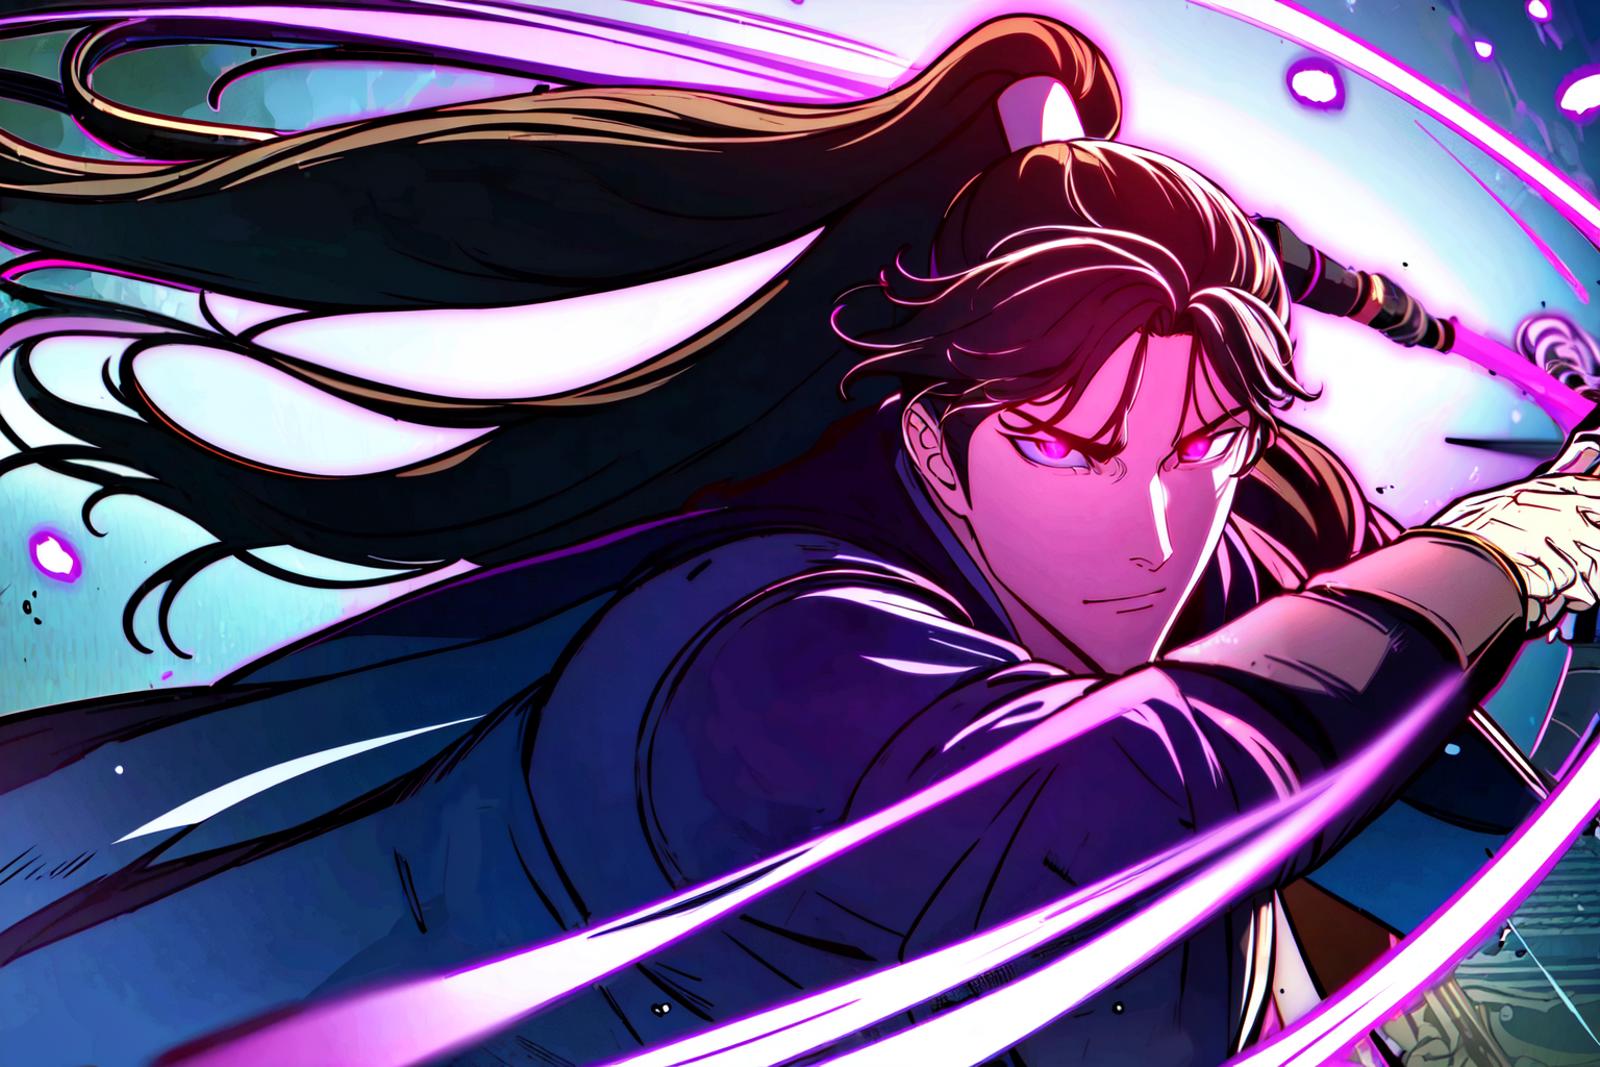 Jin So-Han from A Dance of Swords in the Night (Manhwa) image by Bloodysunkist